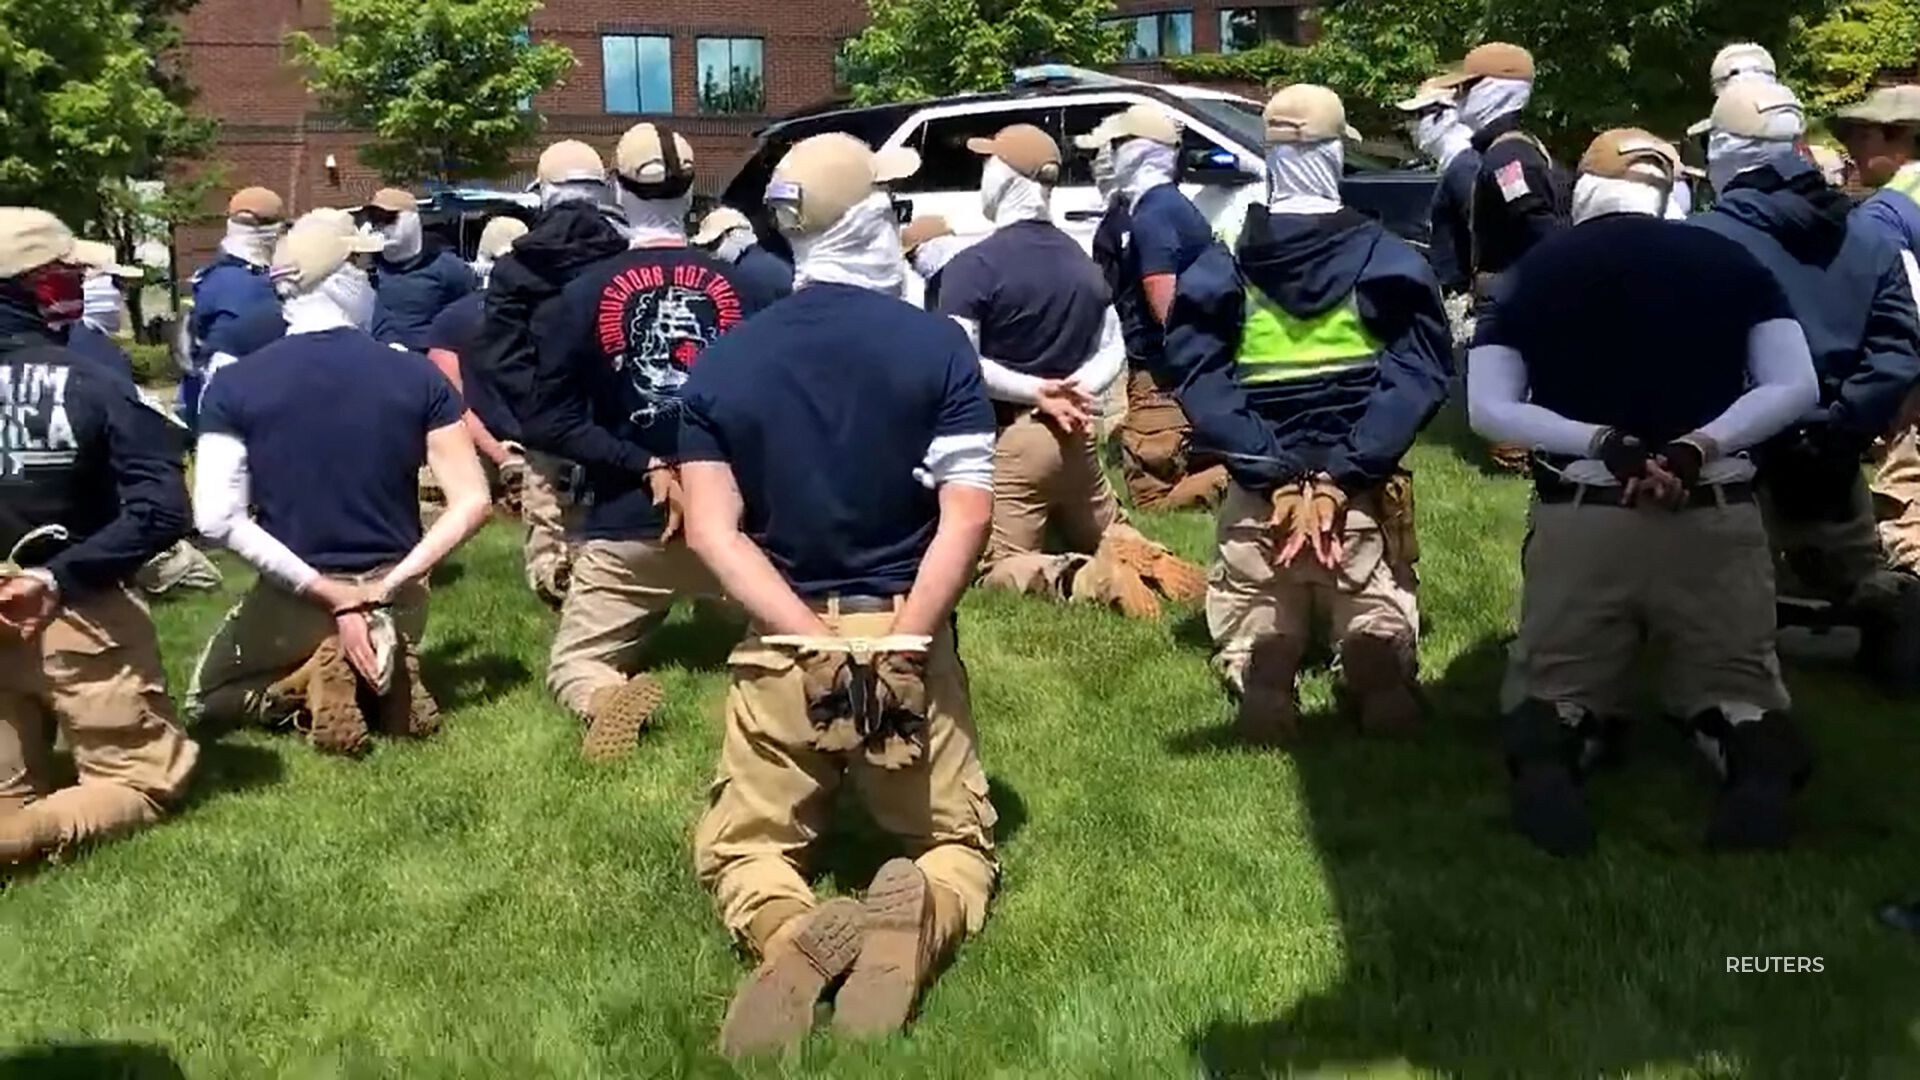 31 Patriot Front members were arrested near a pride event.